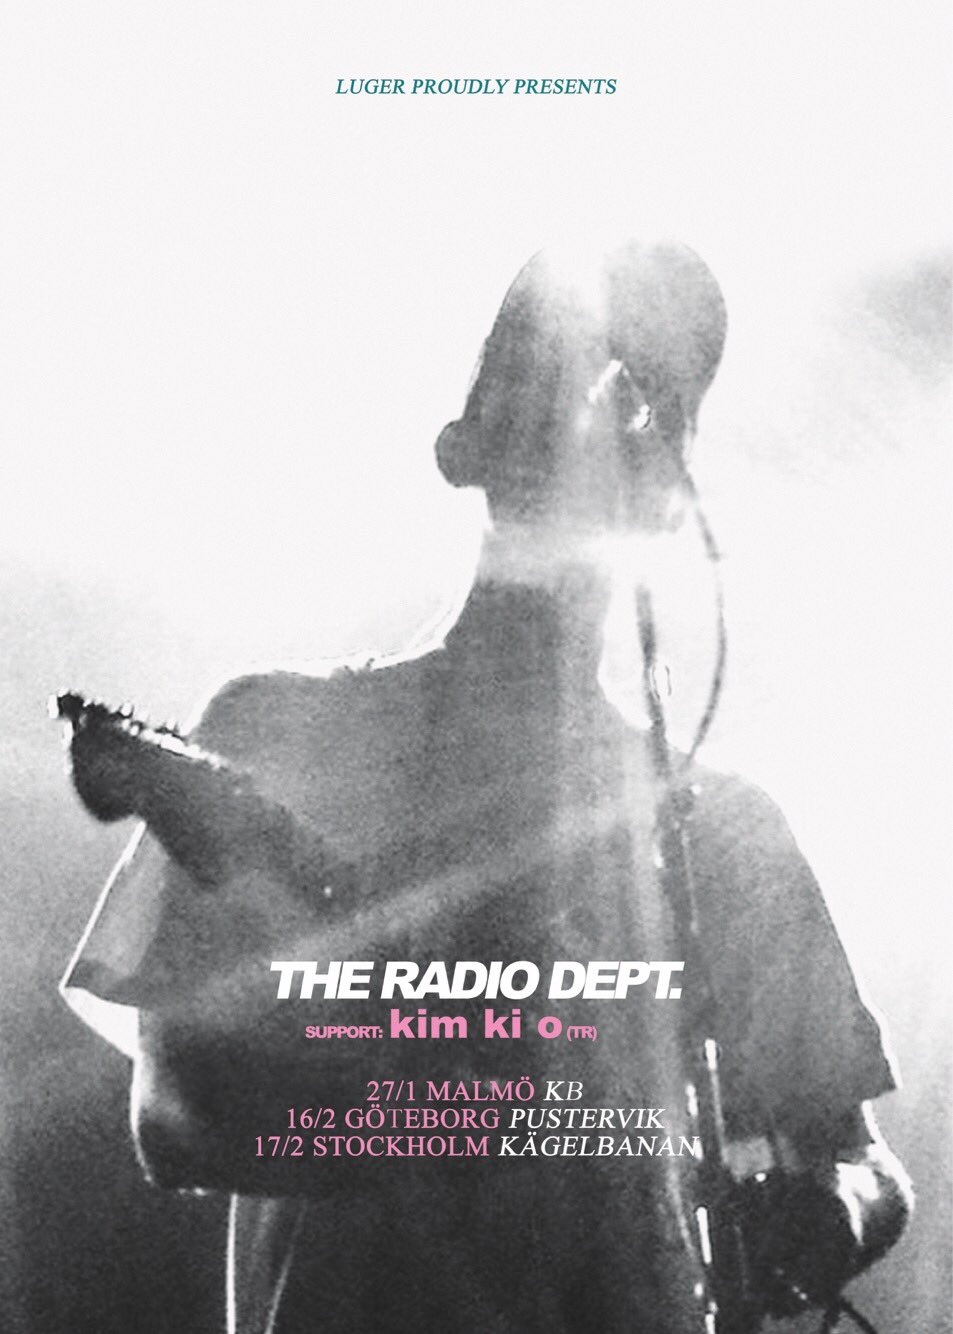 The Radio Dept. on Twitter: "Very proud to announce that Kim Ki O will be  joining us for our Swedish shows in January and February! They have just  released their great new